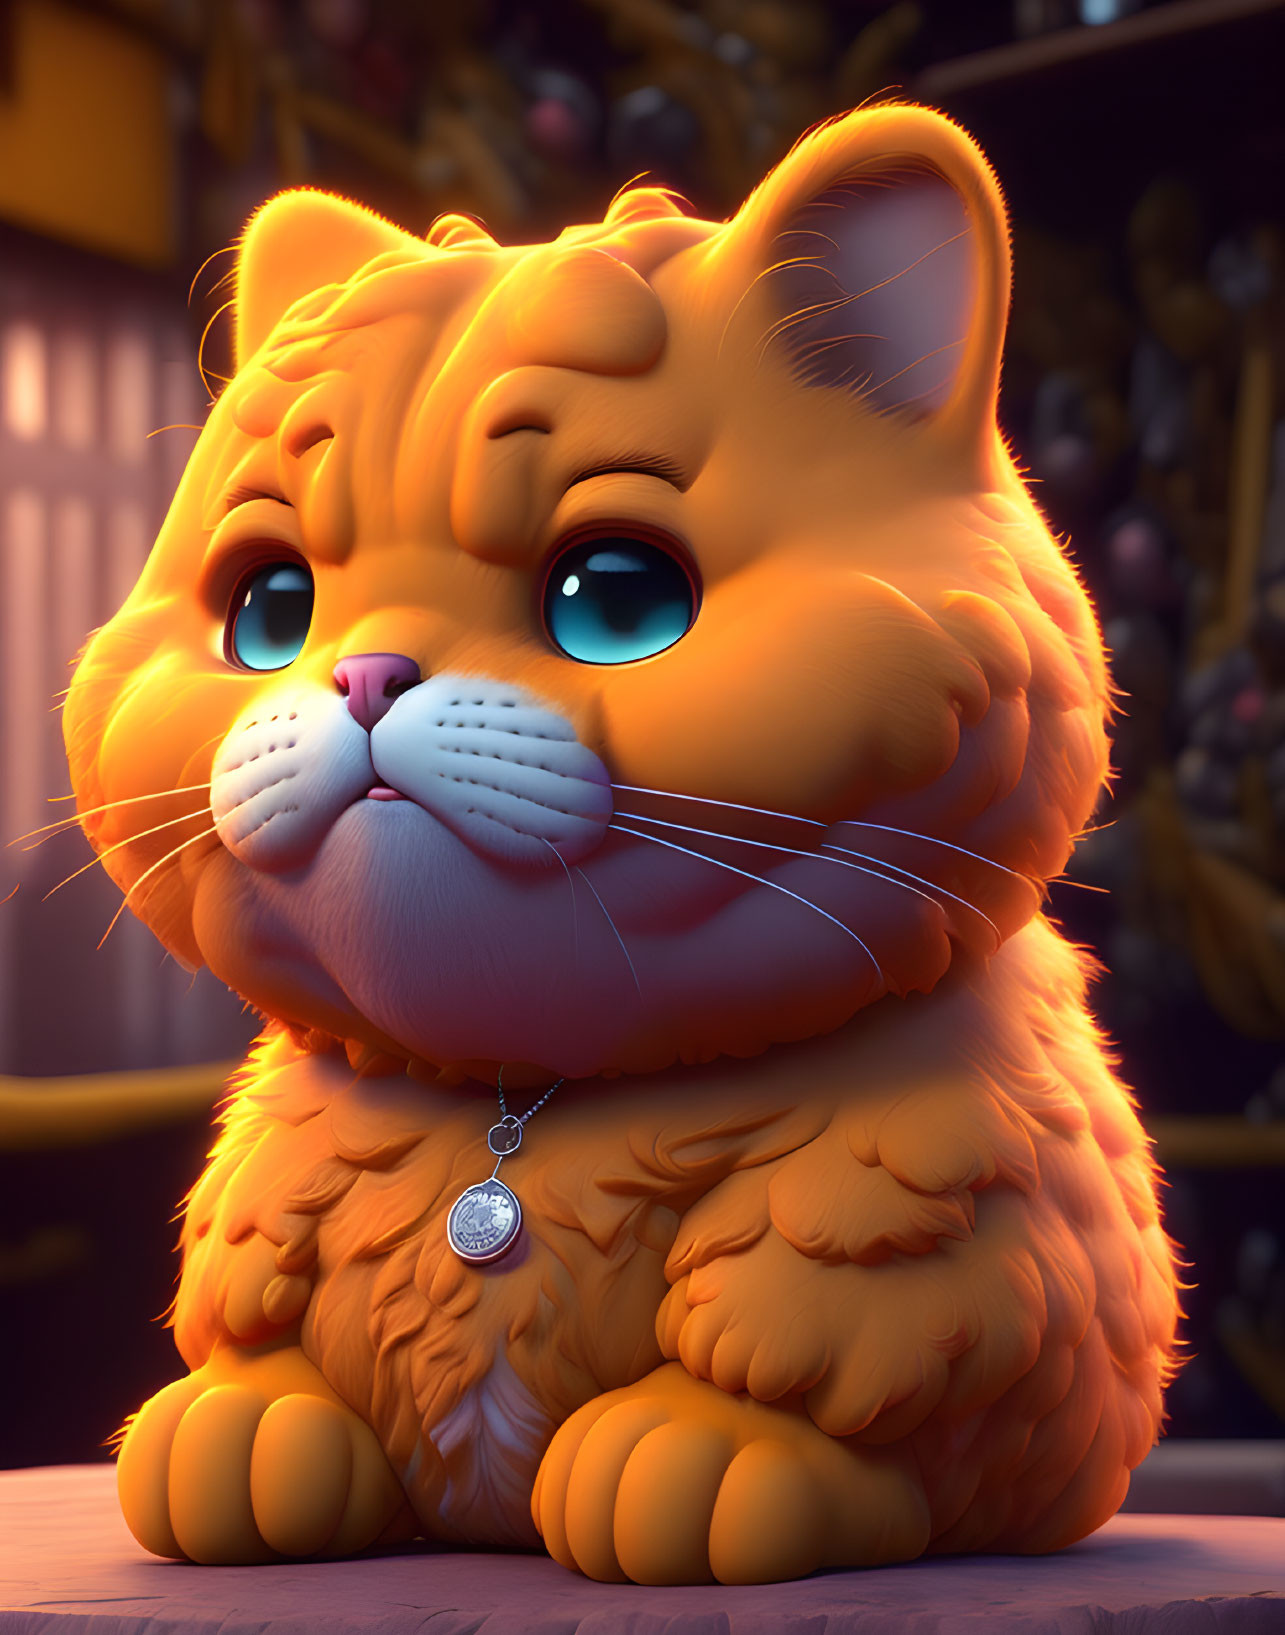 Chubby animated cat with orange fur and sad expression on blurred background